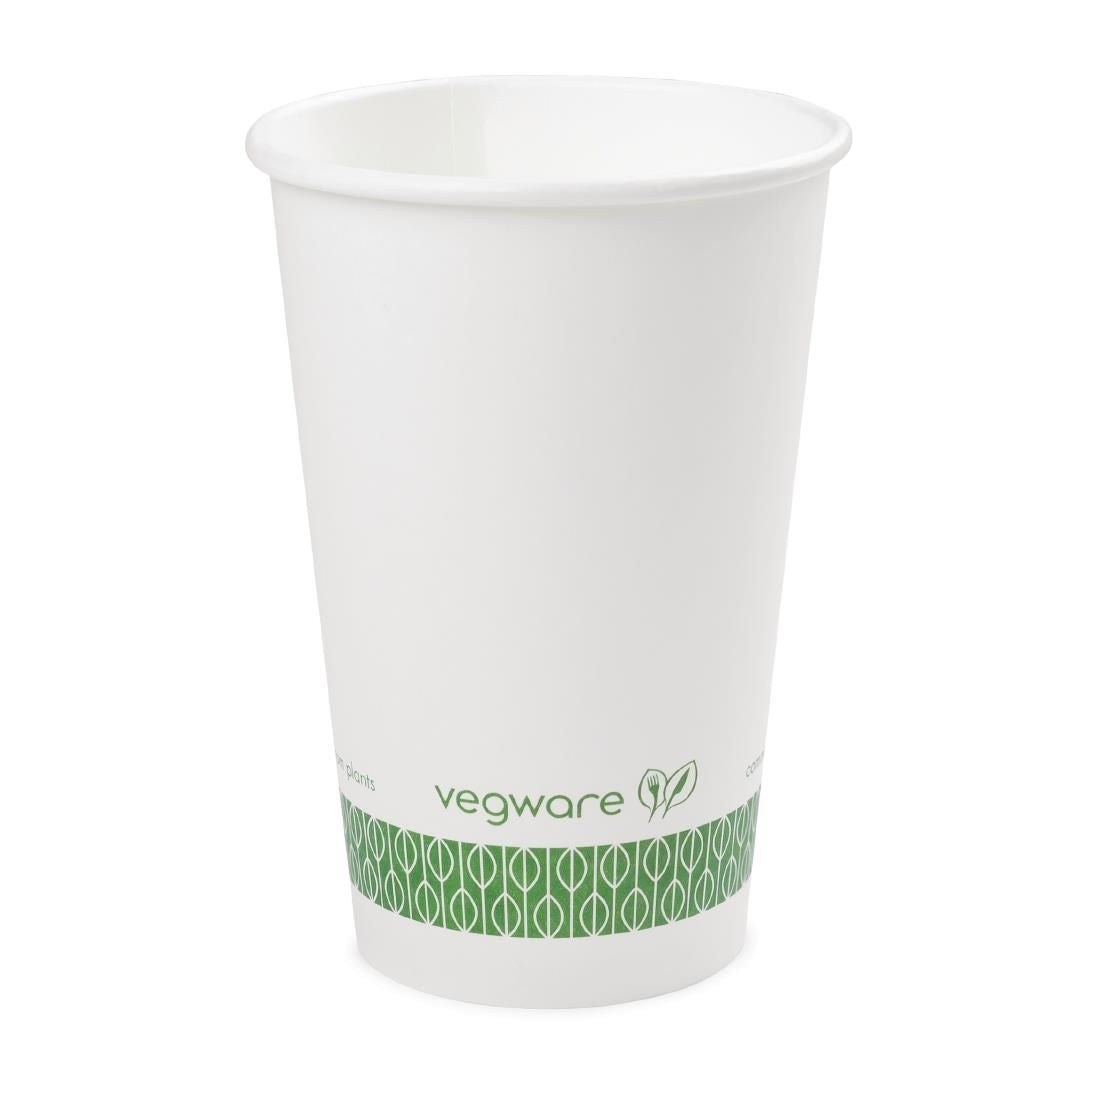 DW620 Vegware Compostable Hot Cups White 455ml / 16oz (Pack of 1000)